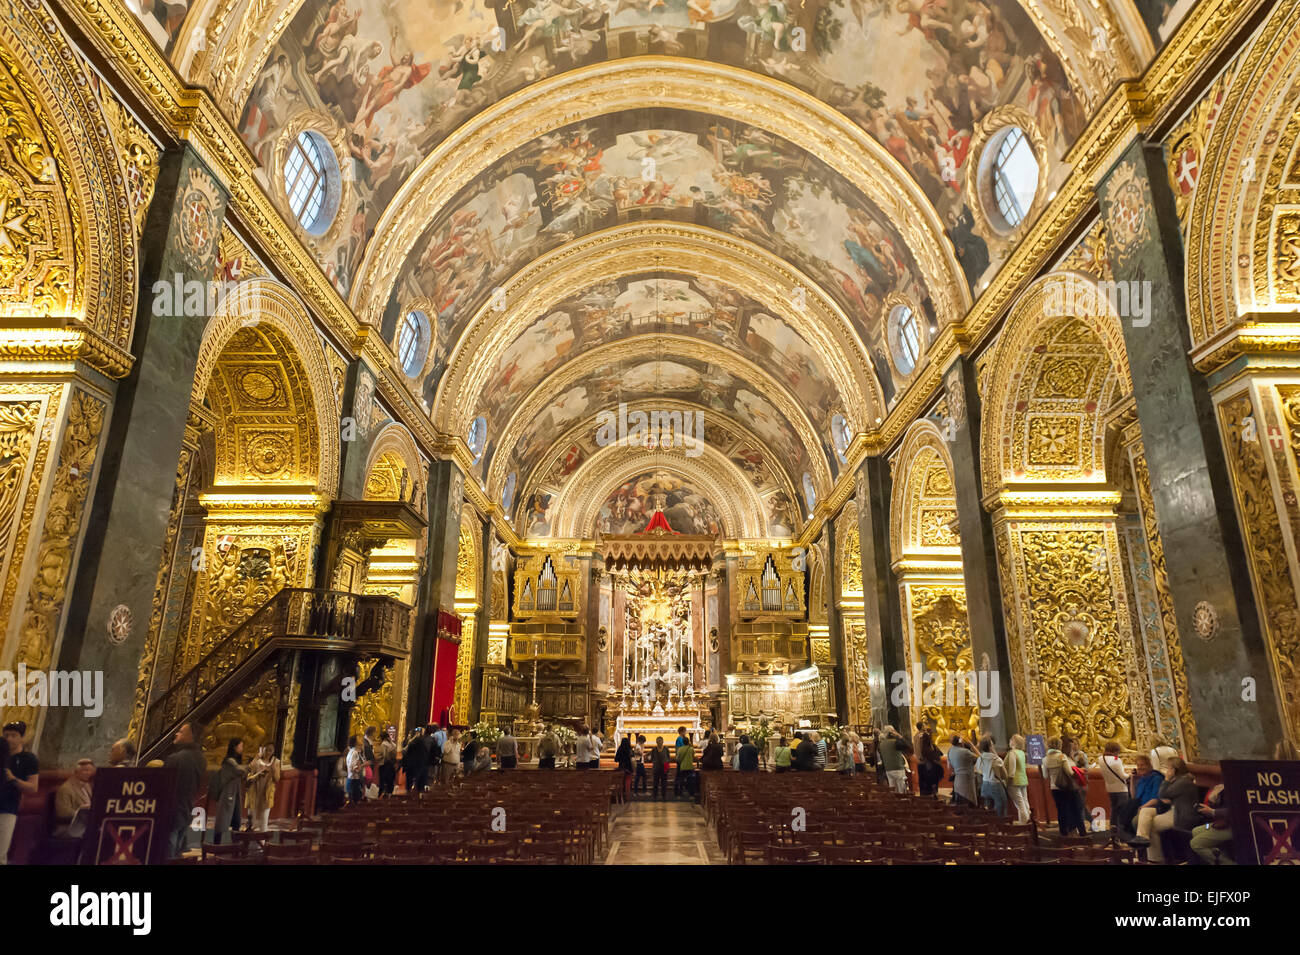 Baroque church, ornately decorated interior, golden decorations and ceiling paintings, nave, St. John's Co-Cathedral Stock Photo